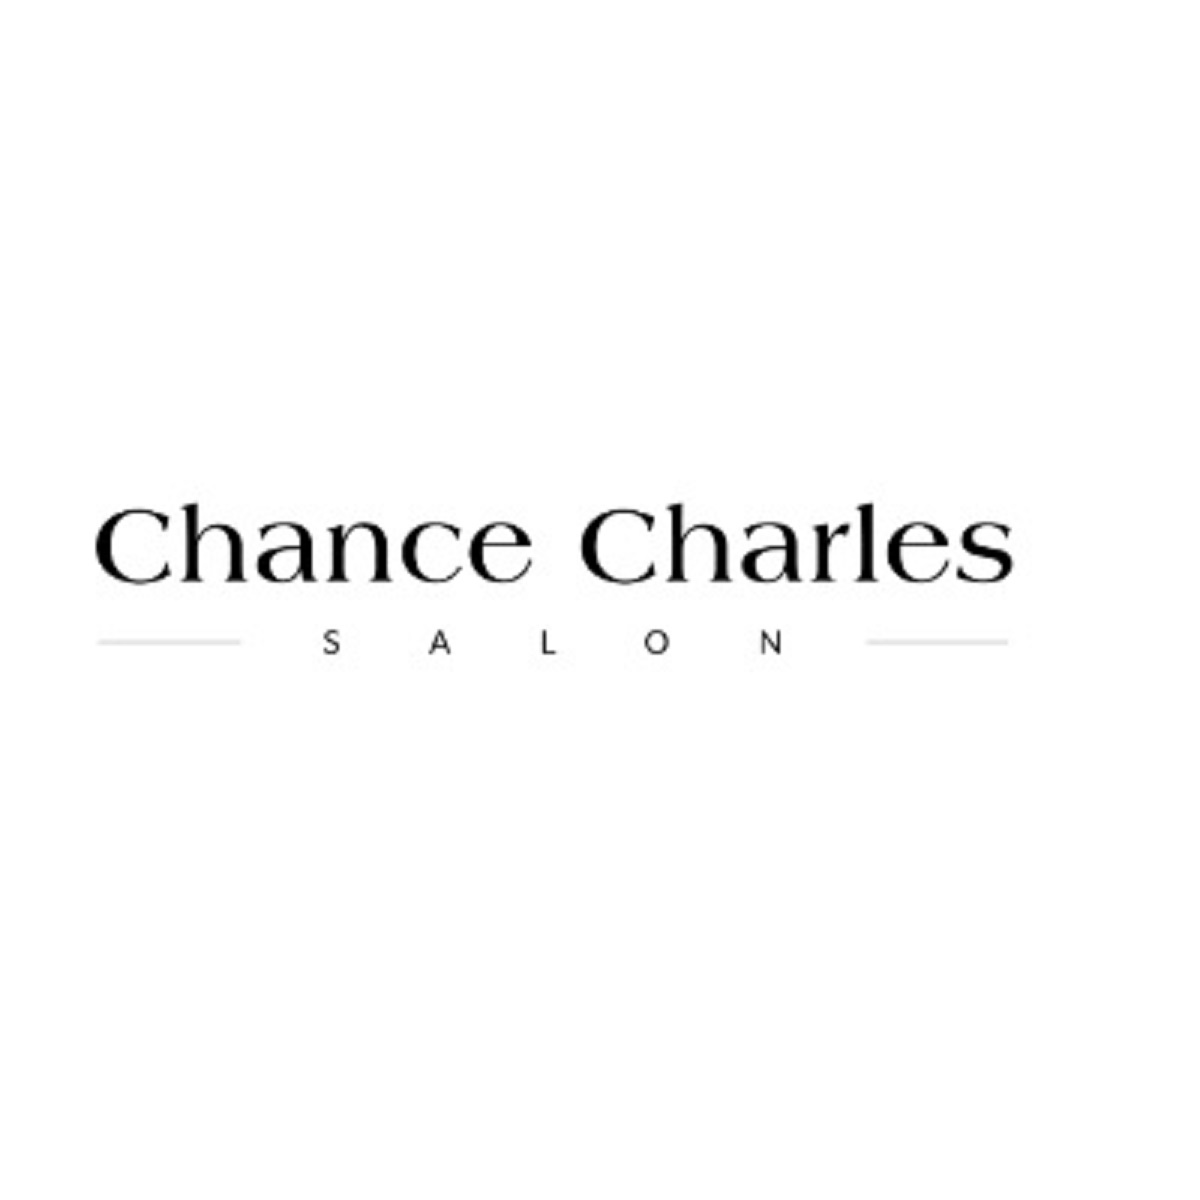 Chance Charles Salon Cover Image